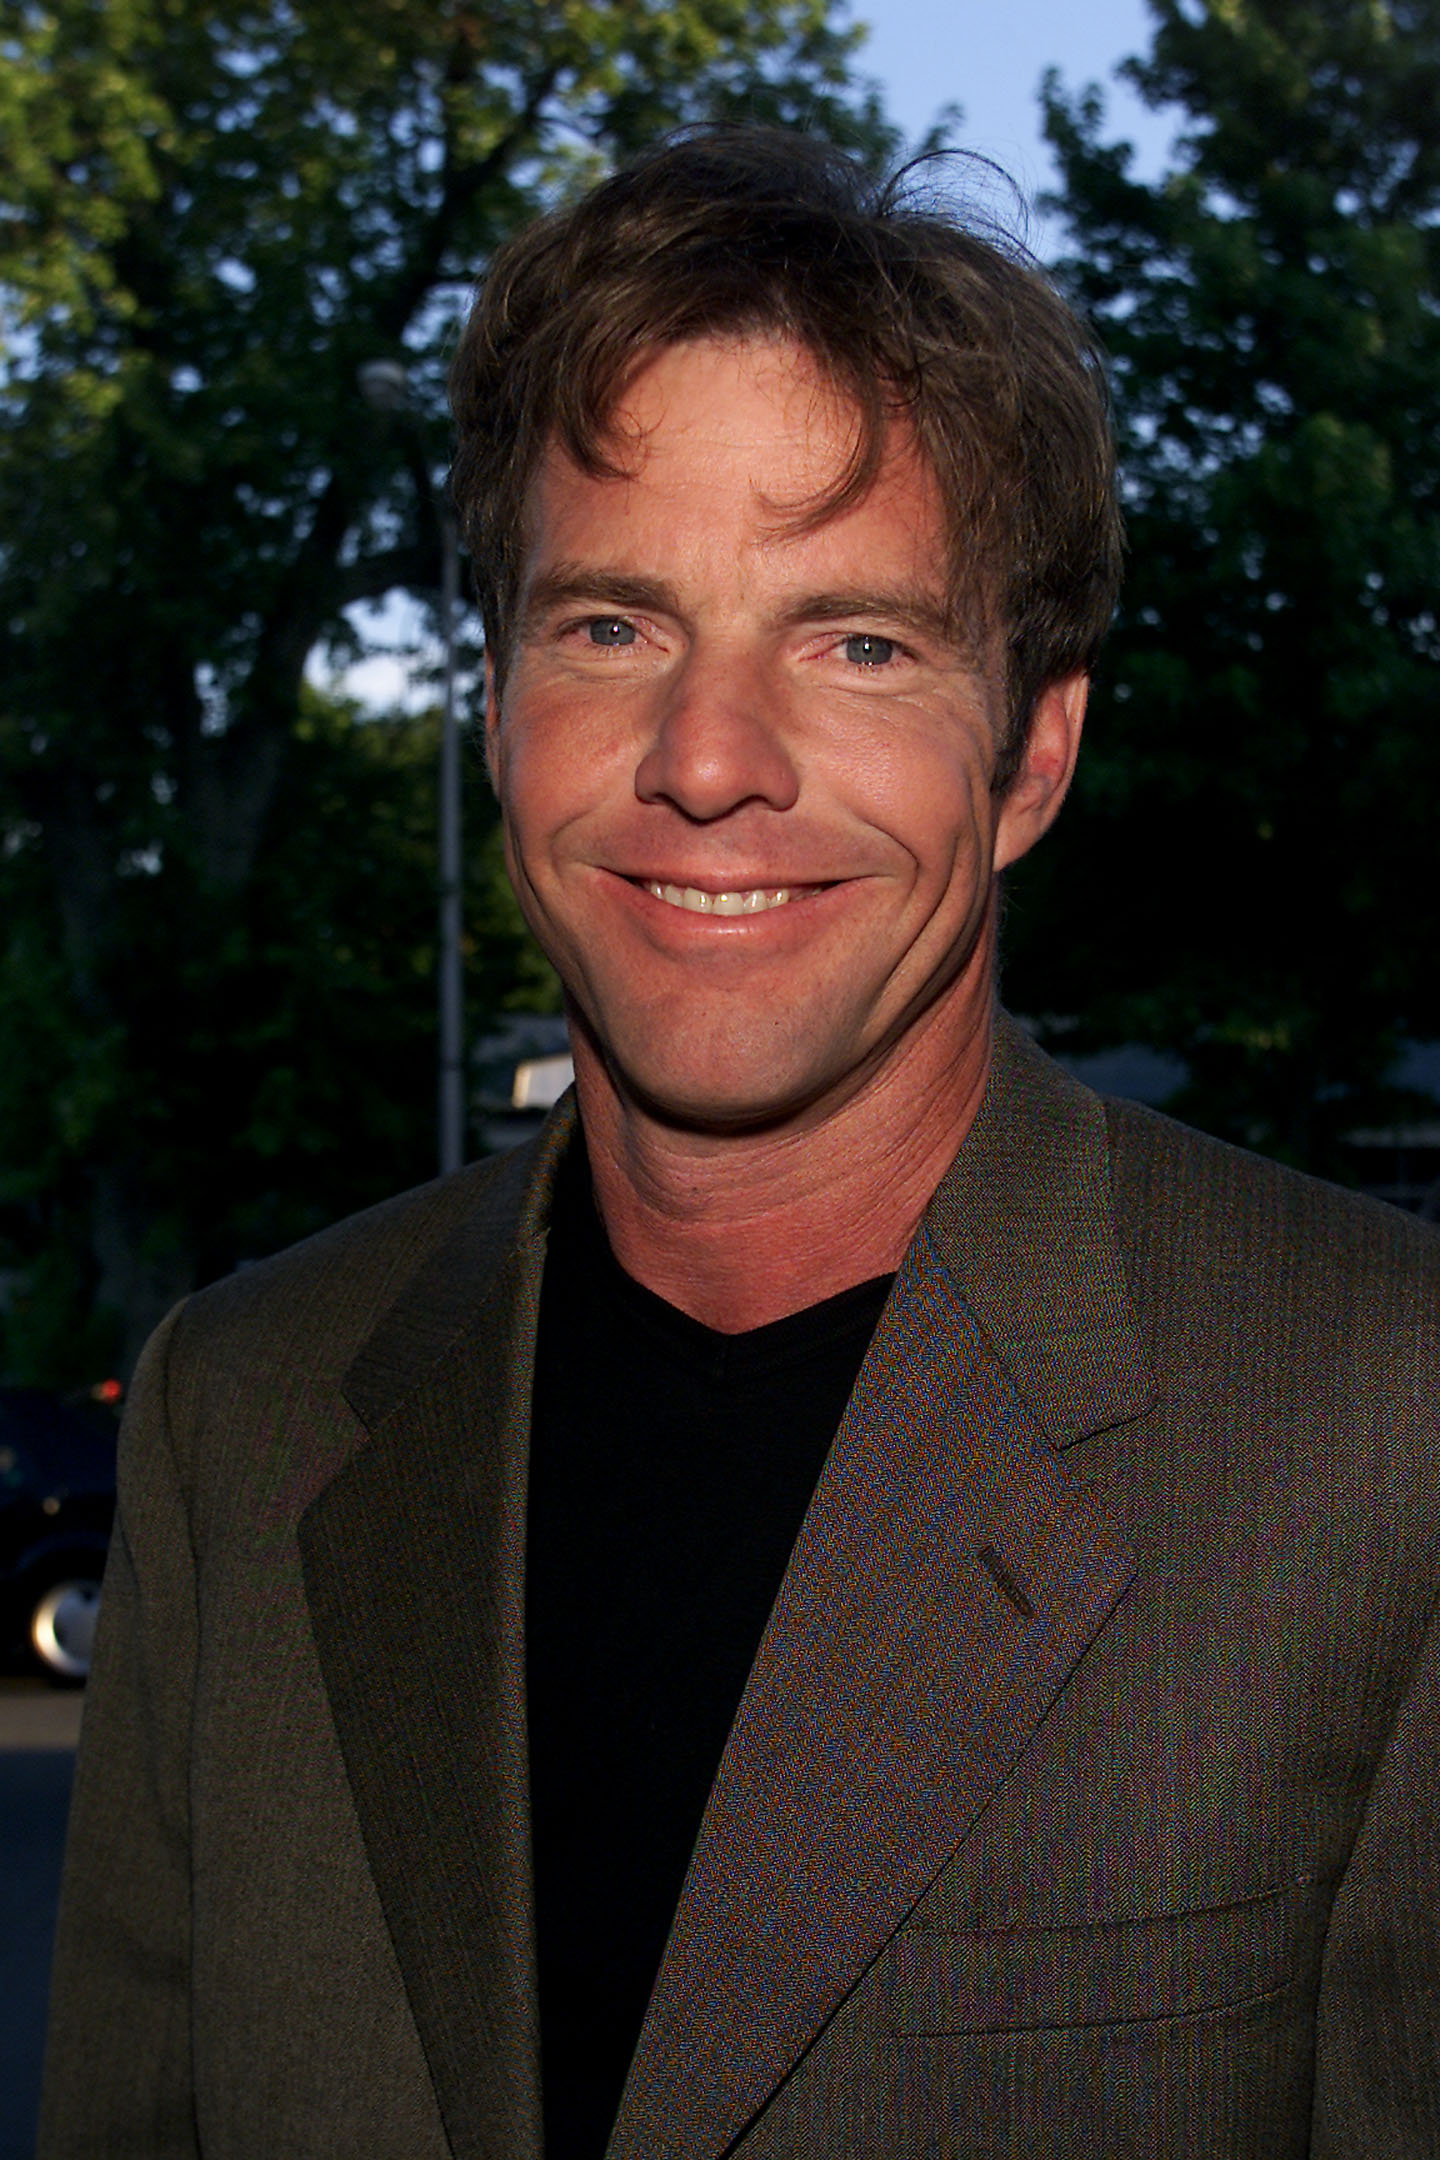 Dennis Quaid at the "Dinner With Friends" screening in New York, 2001 | Source: Getty Images